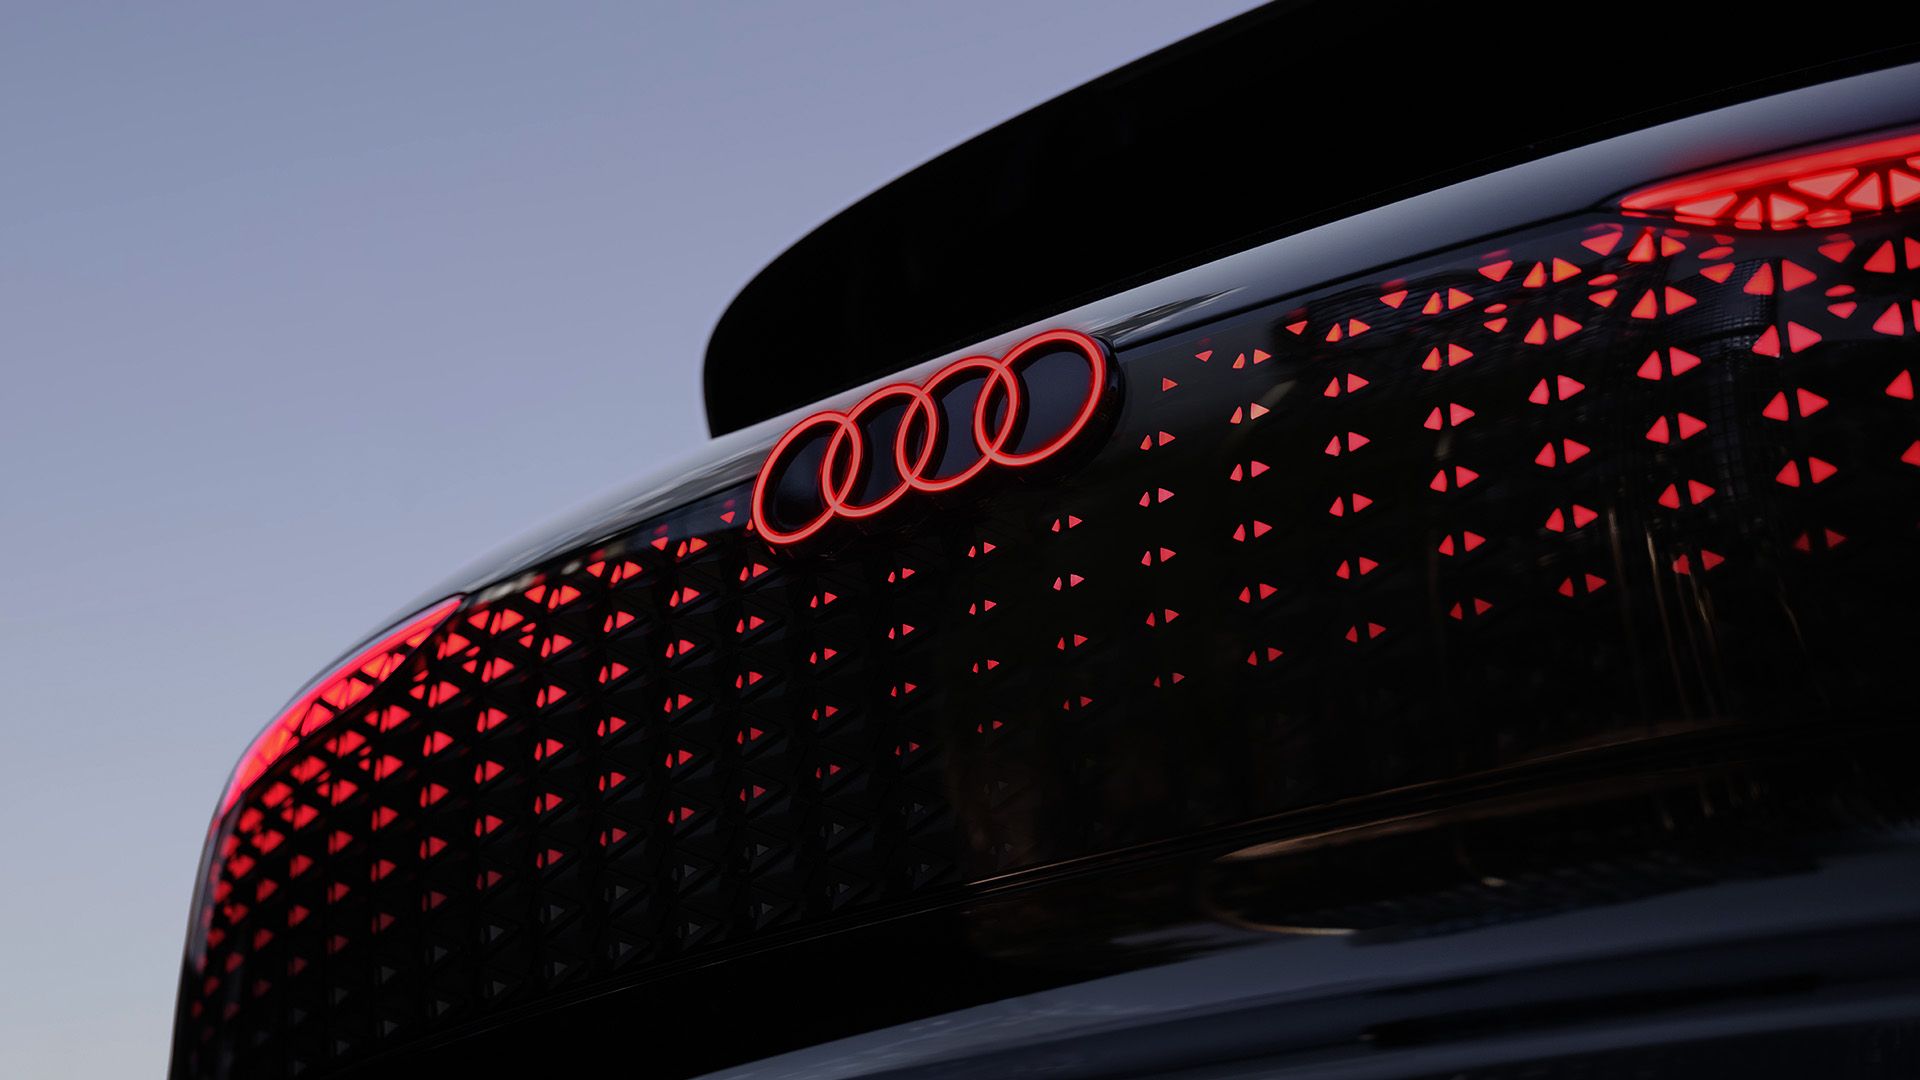 View of the illuminated OLEDs in the taillights.